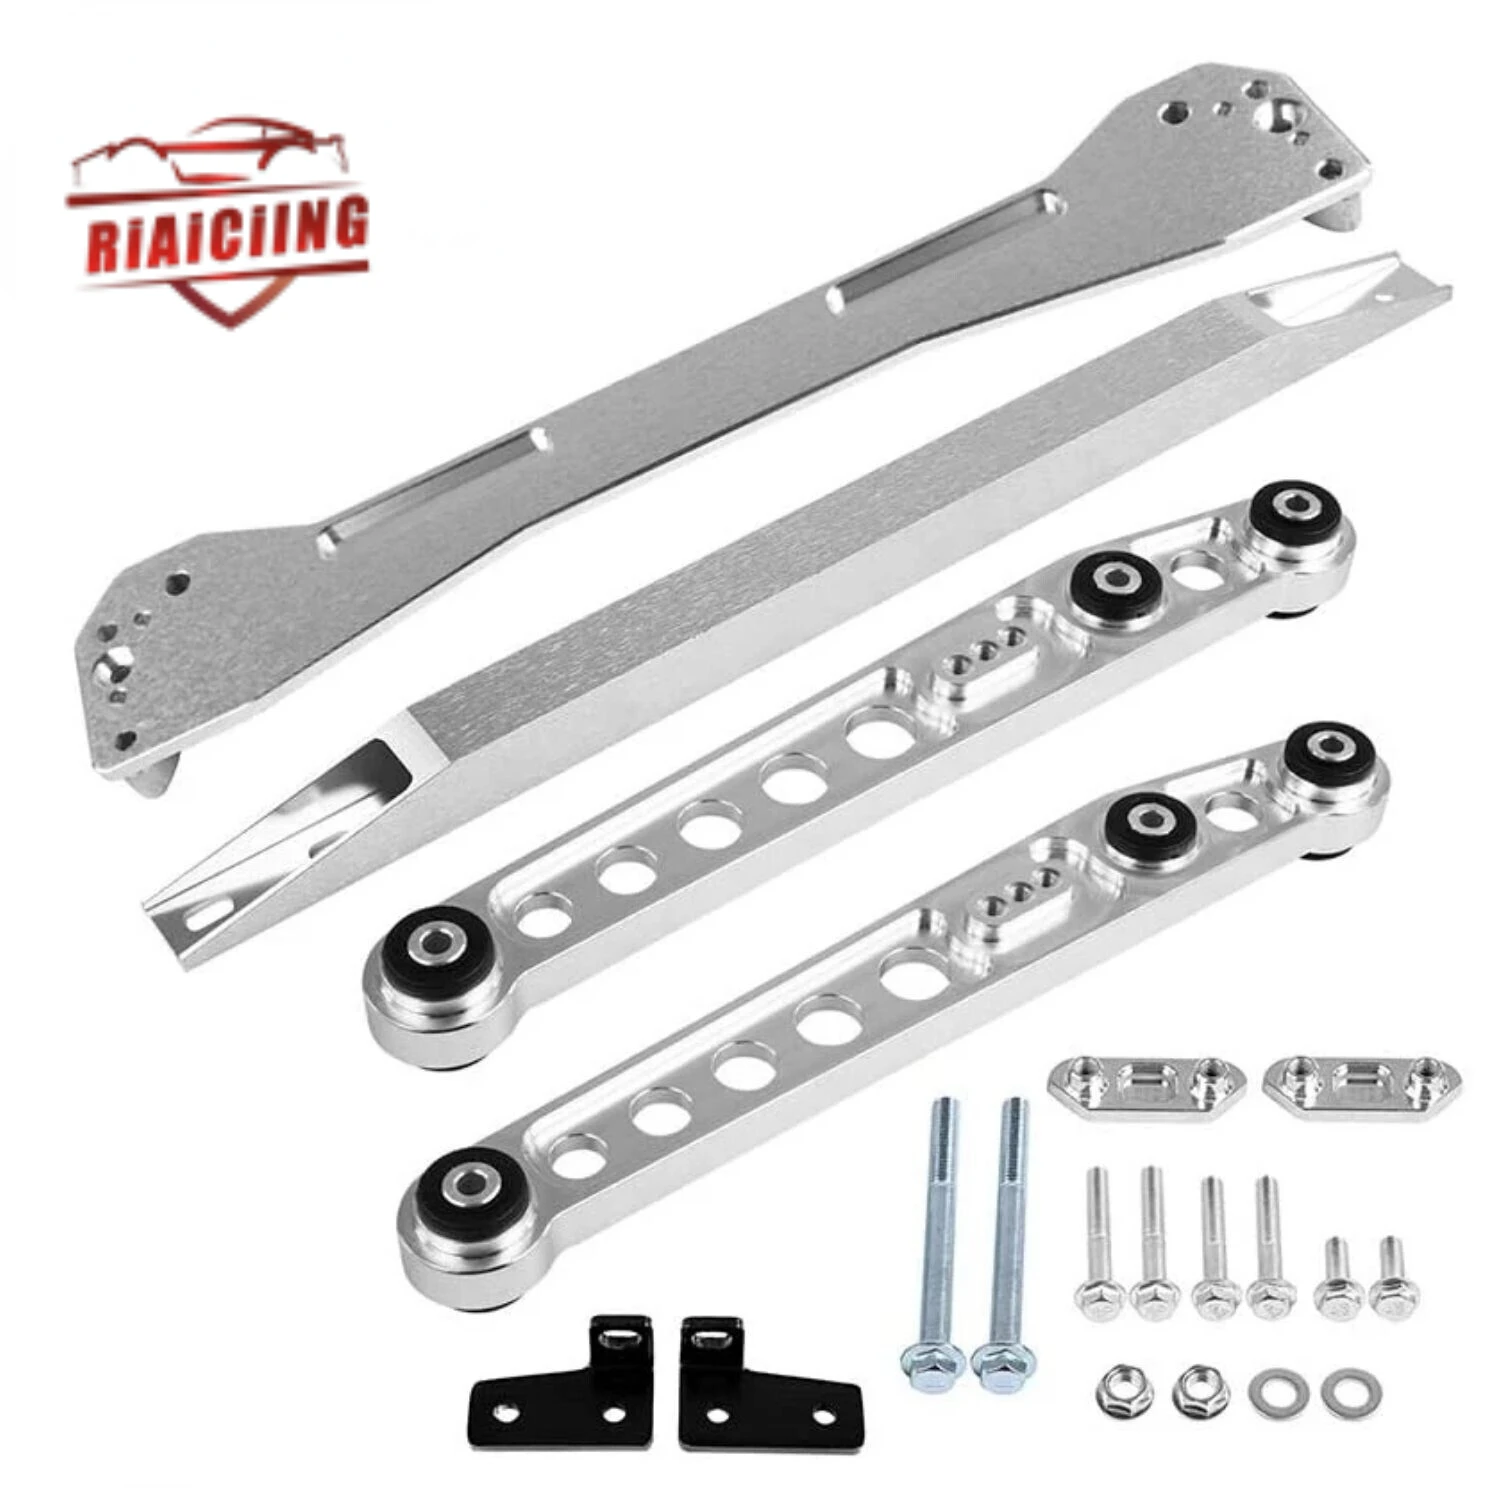 hot sale Silver Rear Lower Control Arms + Tie Bar Subframe Brace for Honda Civic EK 96-00 tie rod support trestle sell well